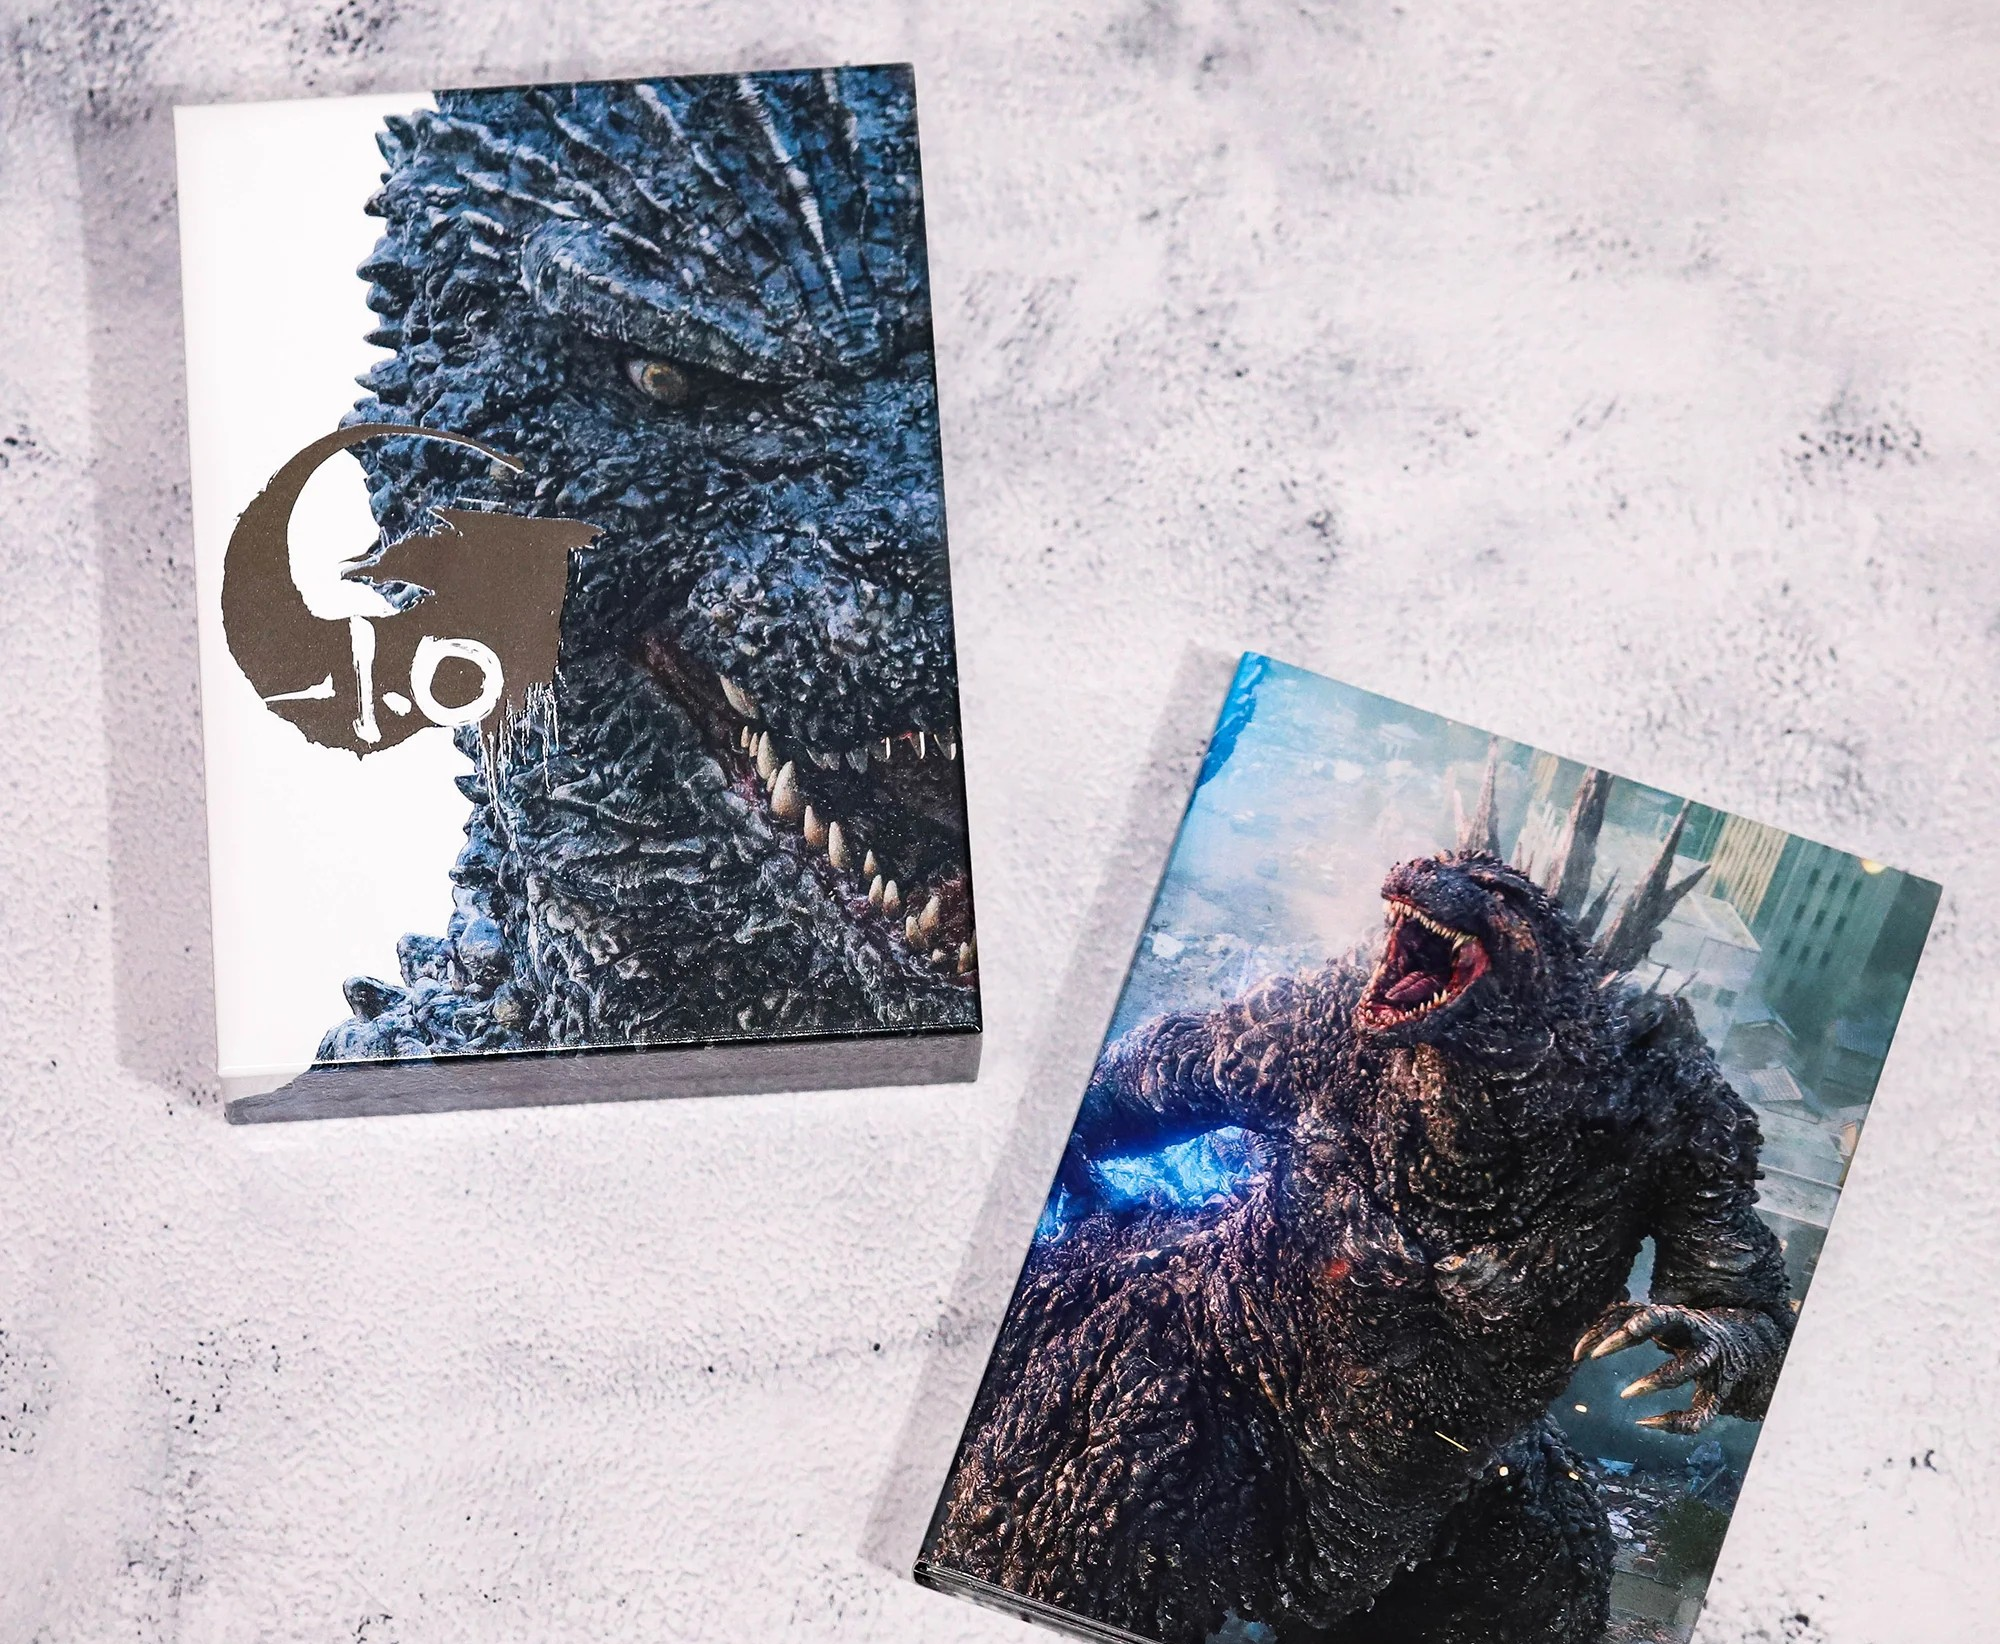 A promotional image showing the slipcase and box included in the Godzilla Minus One Collector’s Edition Blu-ray